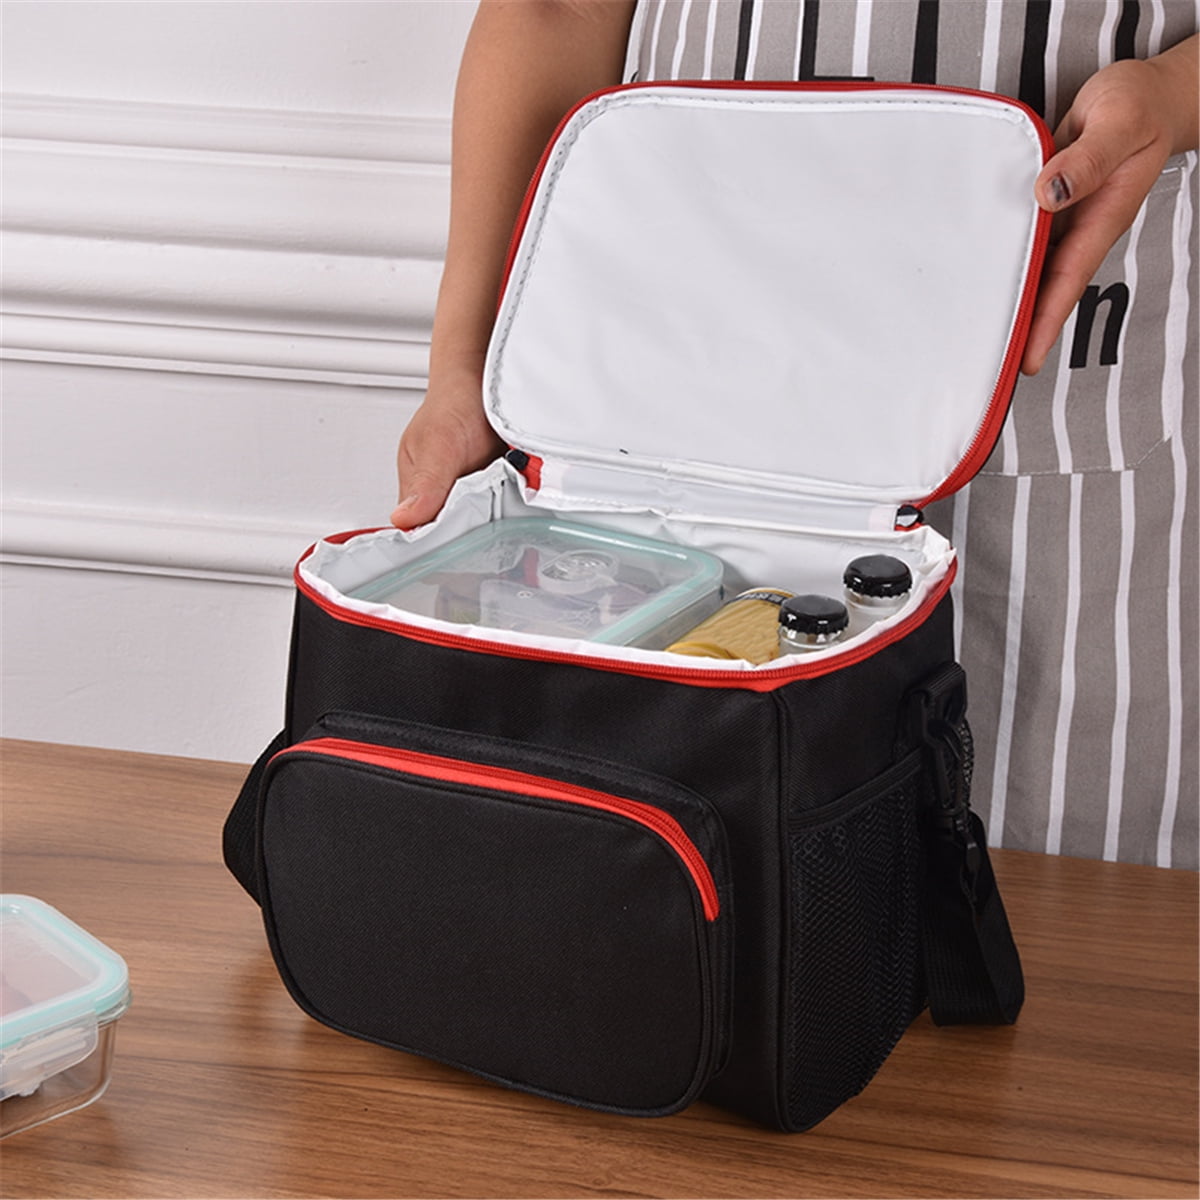 Cool Horse Insulated Thermal Lunch Bag Food Box Storage Picnic Waterproof Cooler 